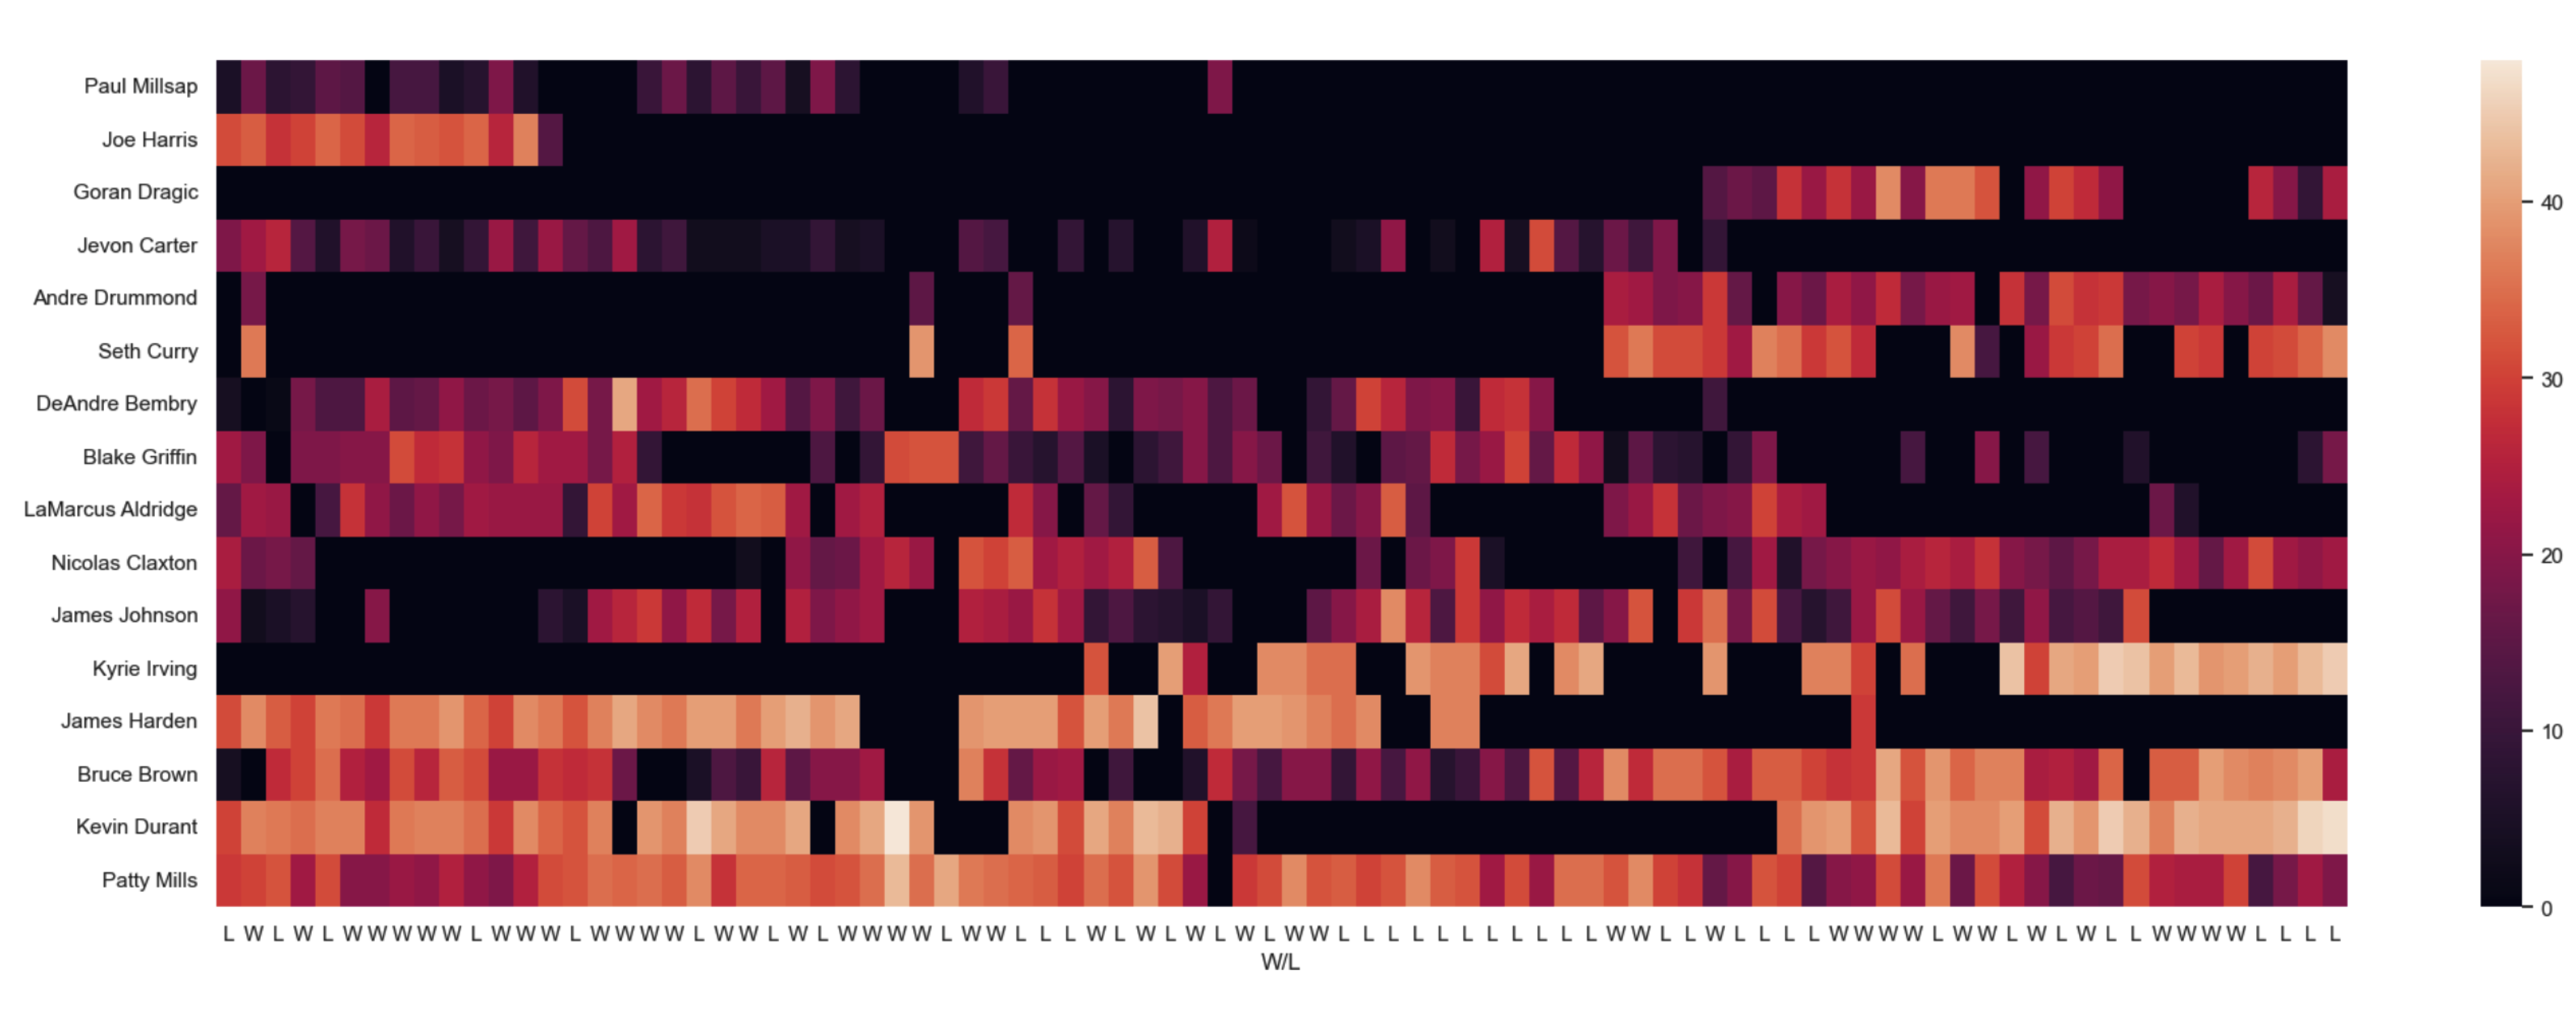 Heatmap of Minutes Played by Brooklyn Nets Player, 2021/2022 season